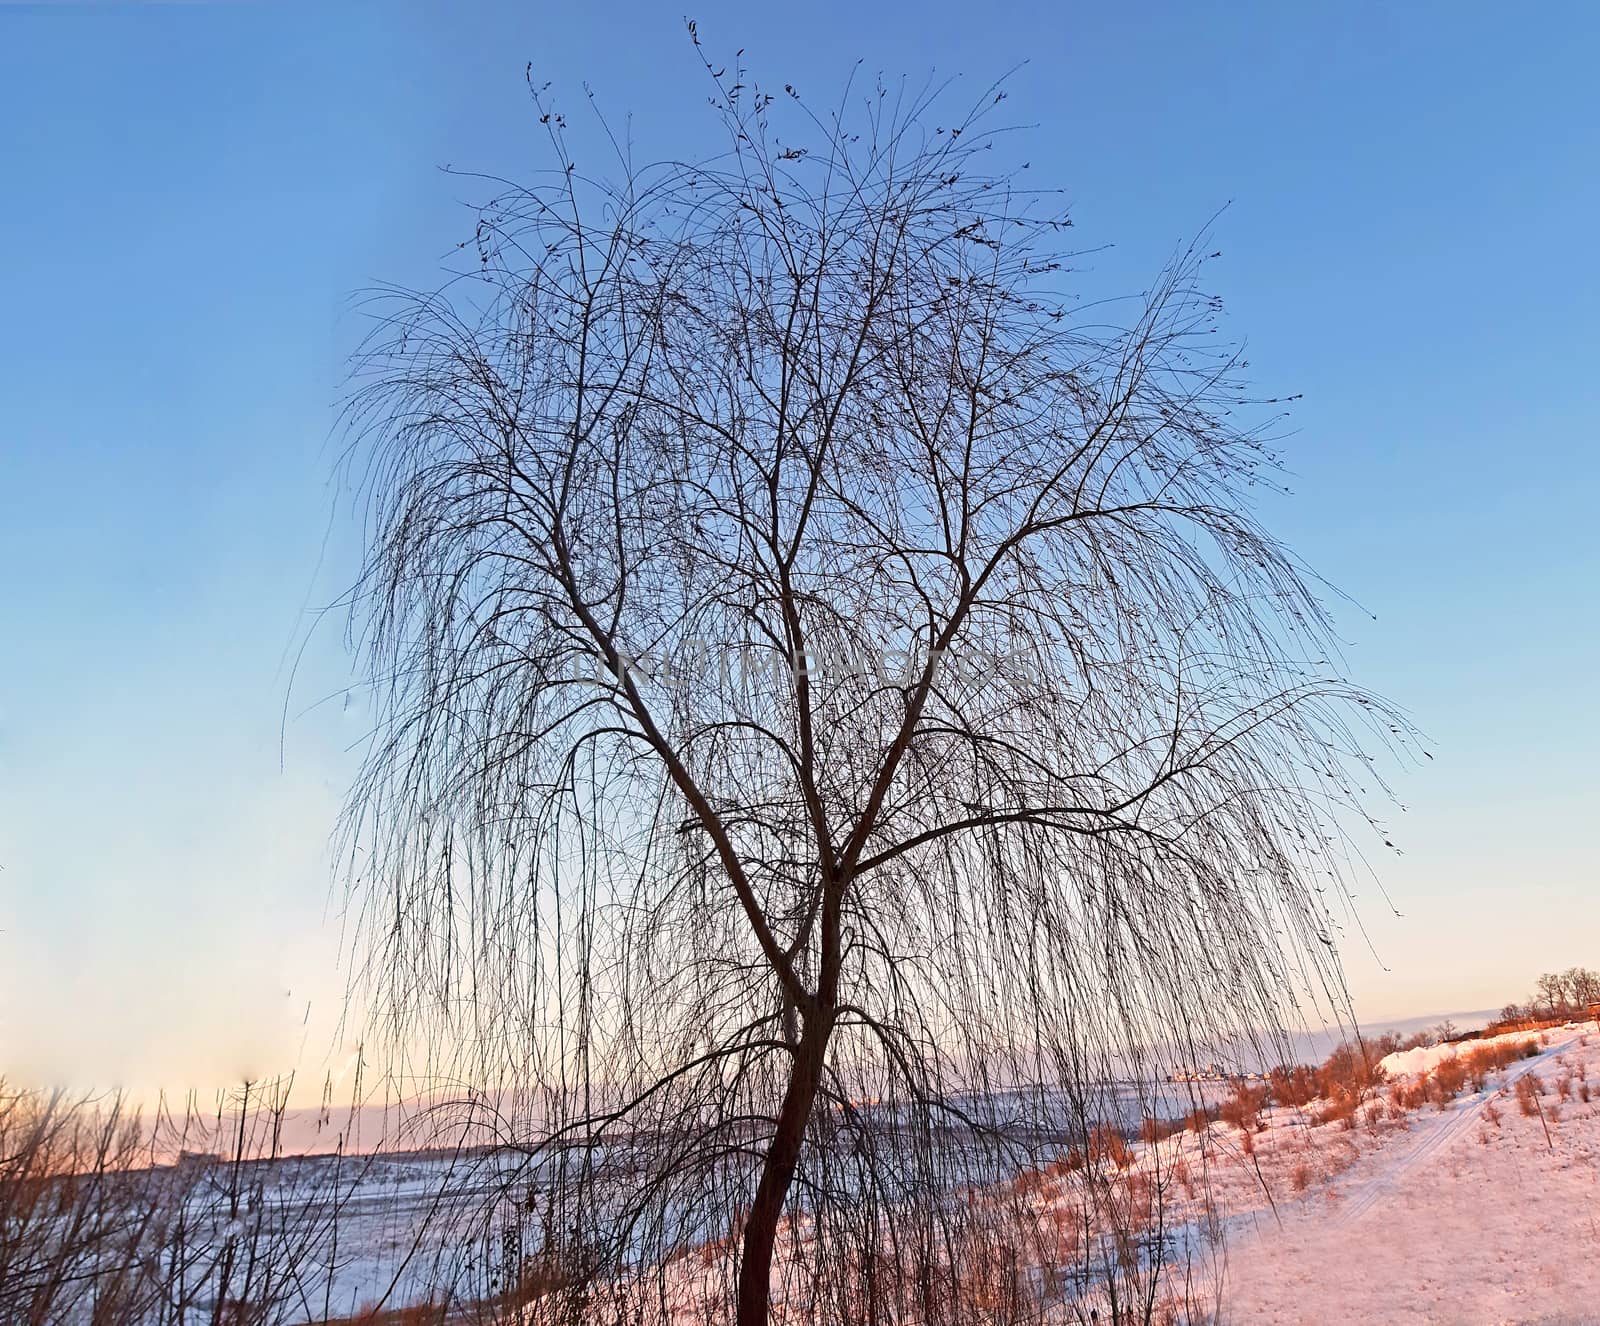 Young willow tree in winter and blue sky at sunset landscape by Mindru